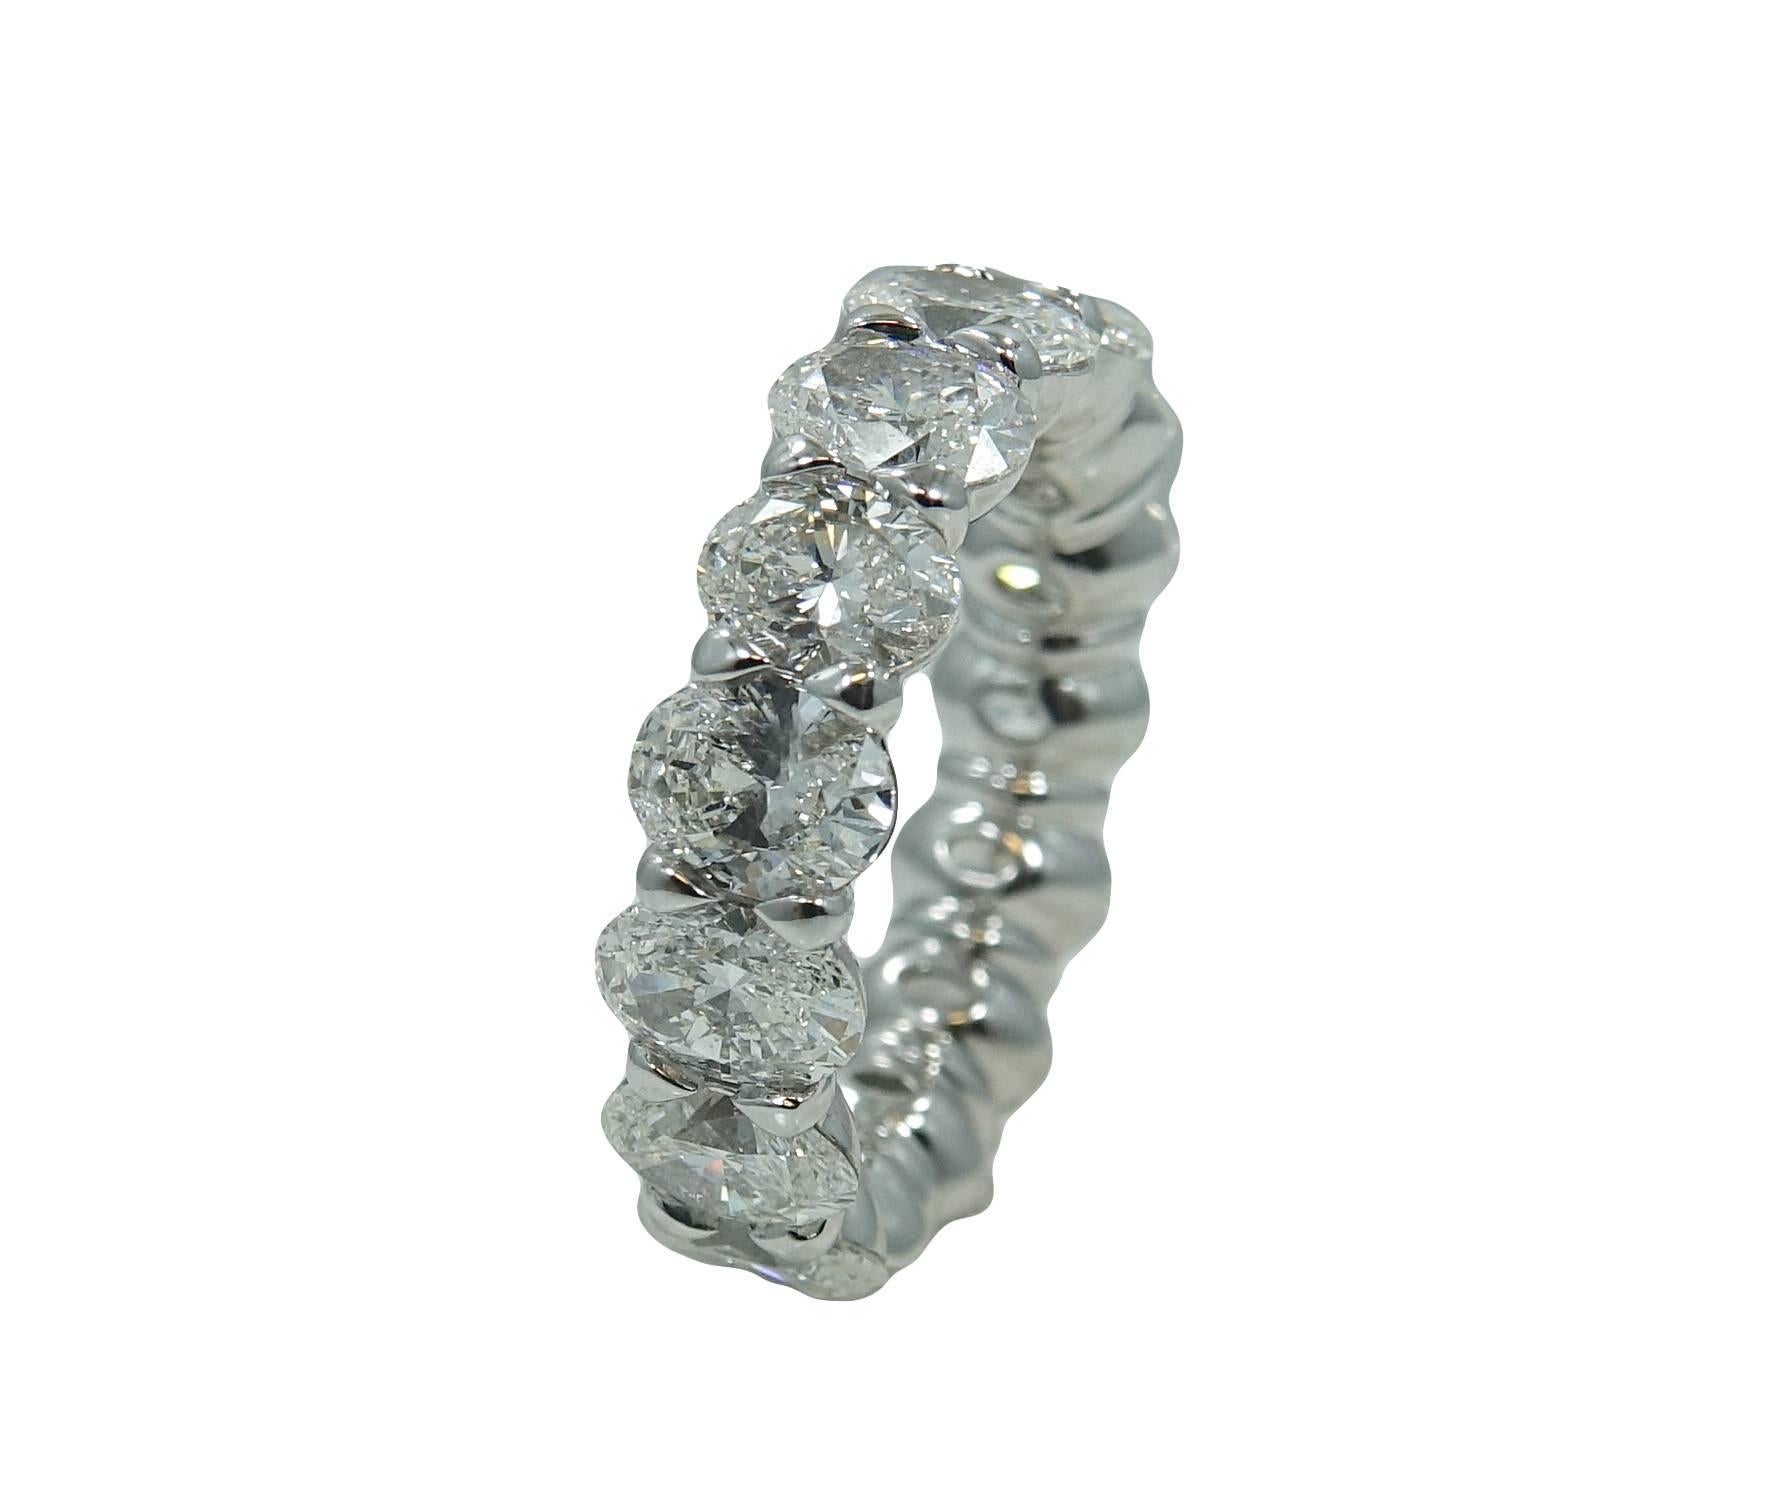 Platinum Eternity Band With 15 Oval Cut Diamonds Weighing A Total Carat Weight Of 7.38ct in Buttercup Mounting. This Ring Is A Size 6.5.